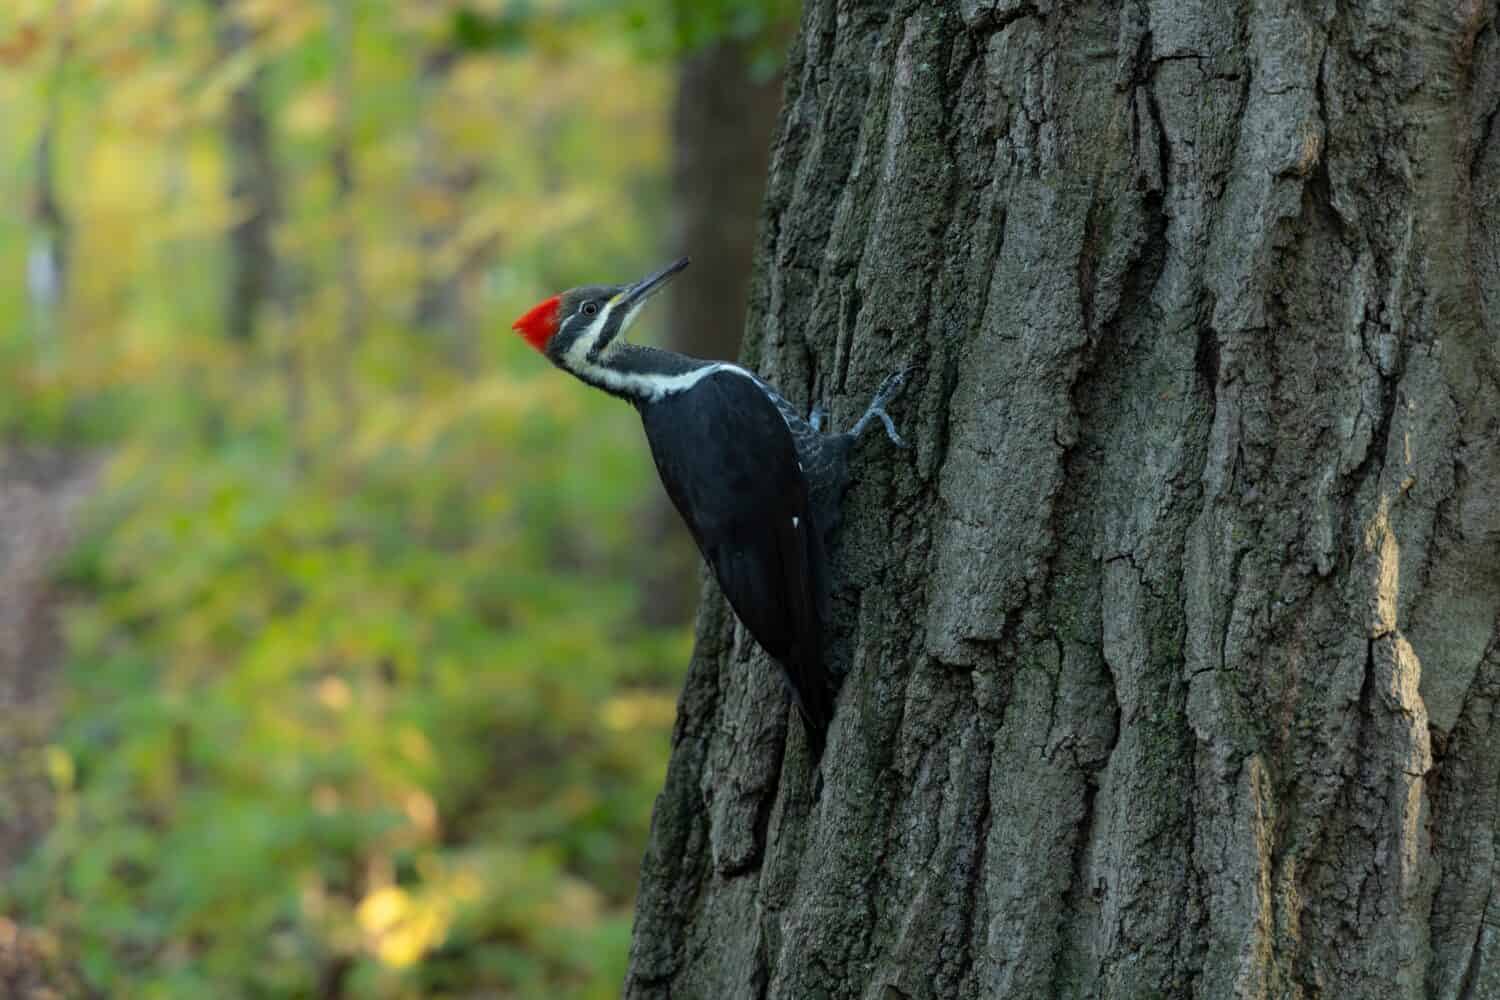 A closeup of a imperial woodpecker on a tree trunk in a forest